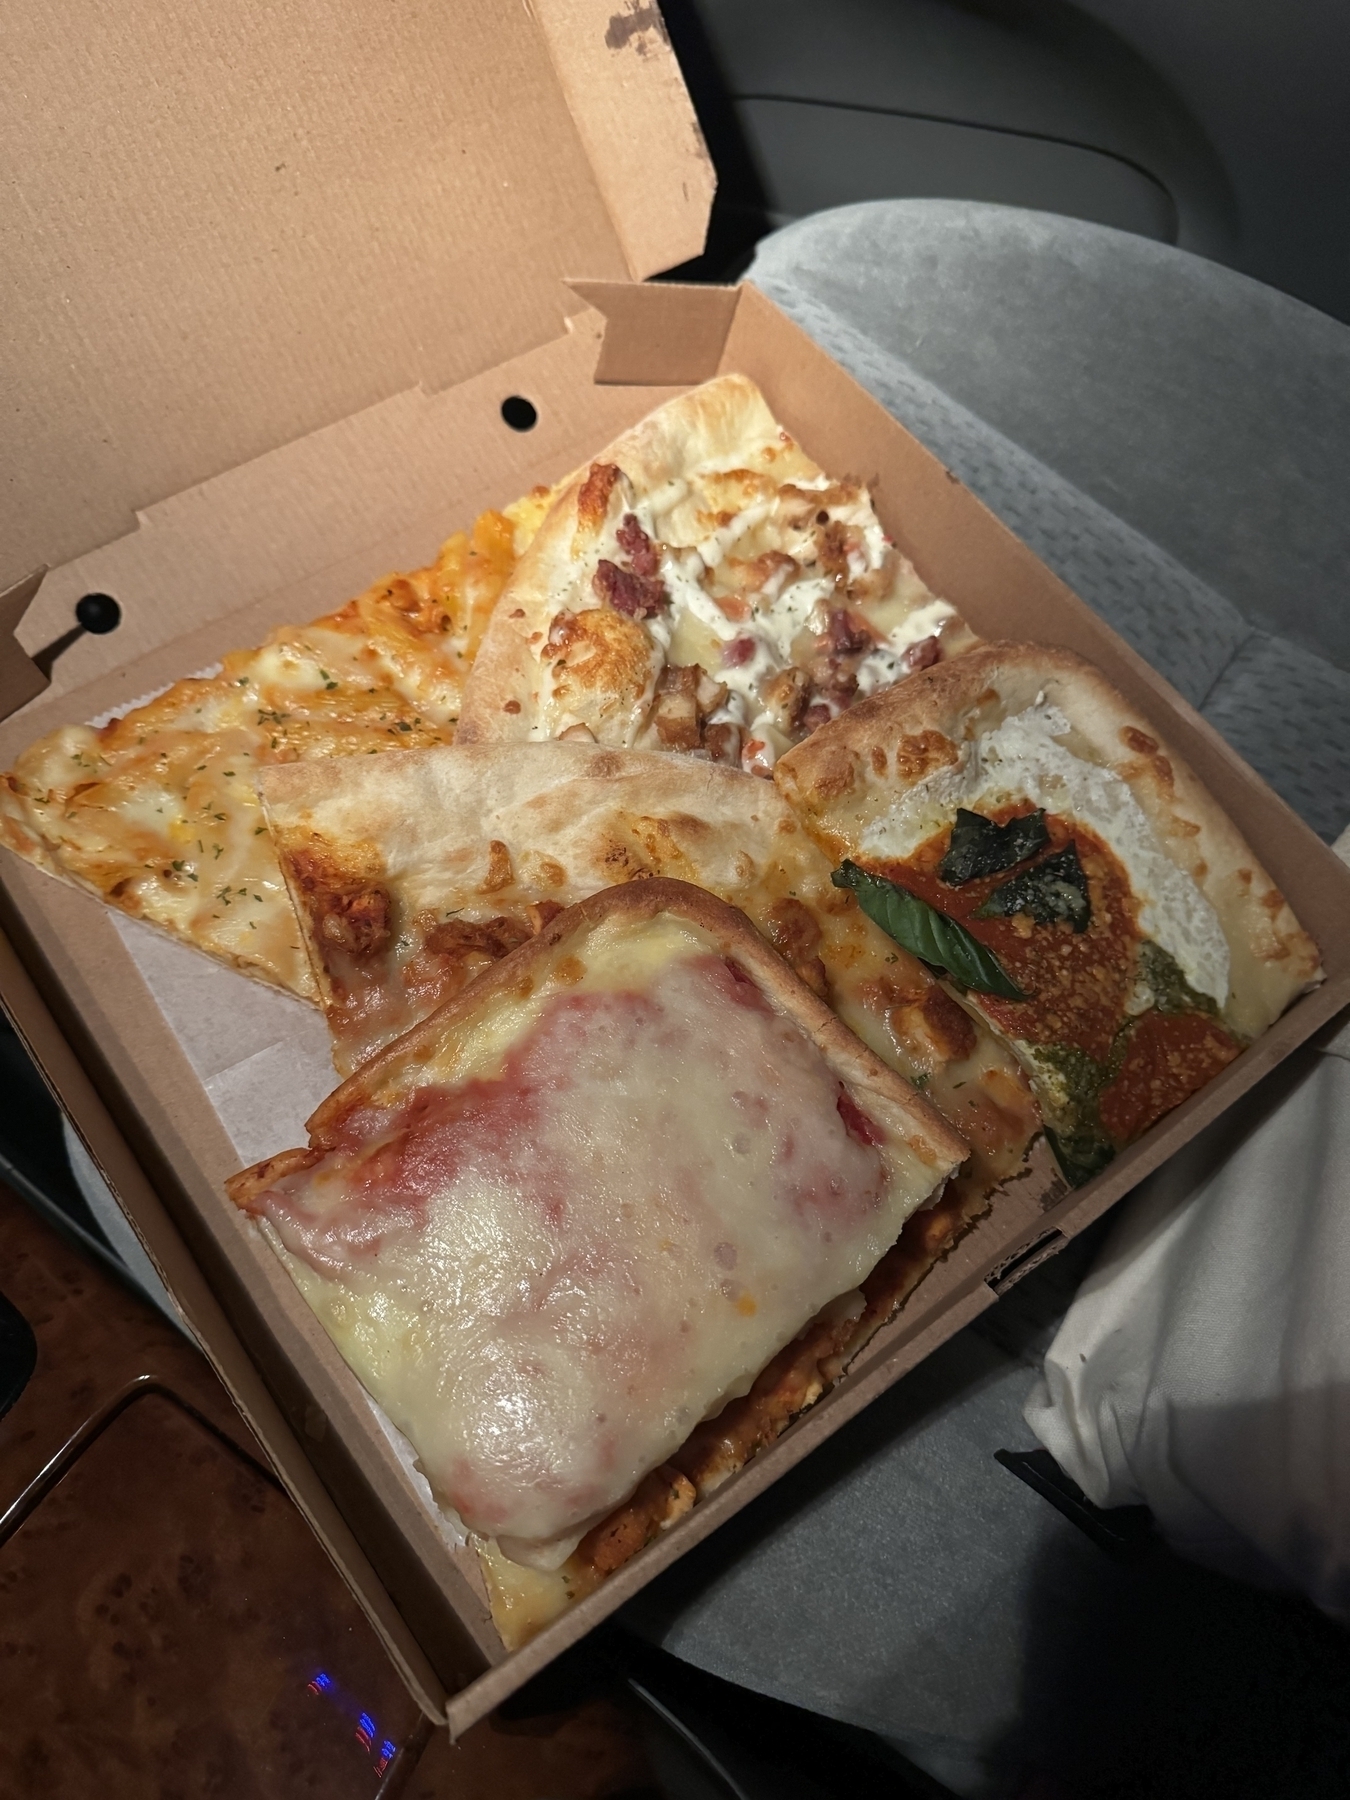 Five slices of pizza overlapping inside a square pizza box. Sat on a grey fabric car set. Illuminated by the ceiling light.